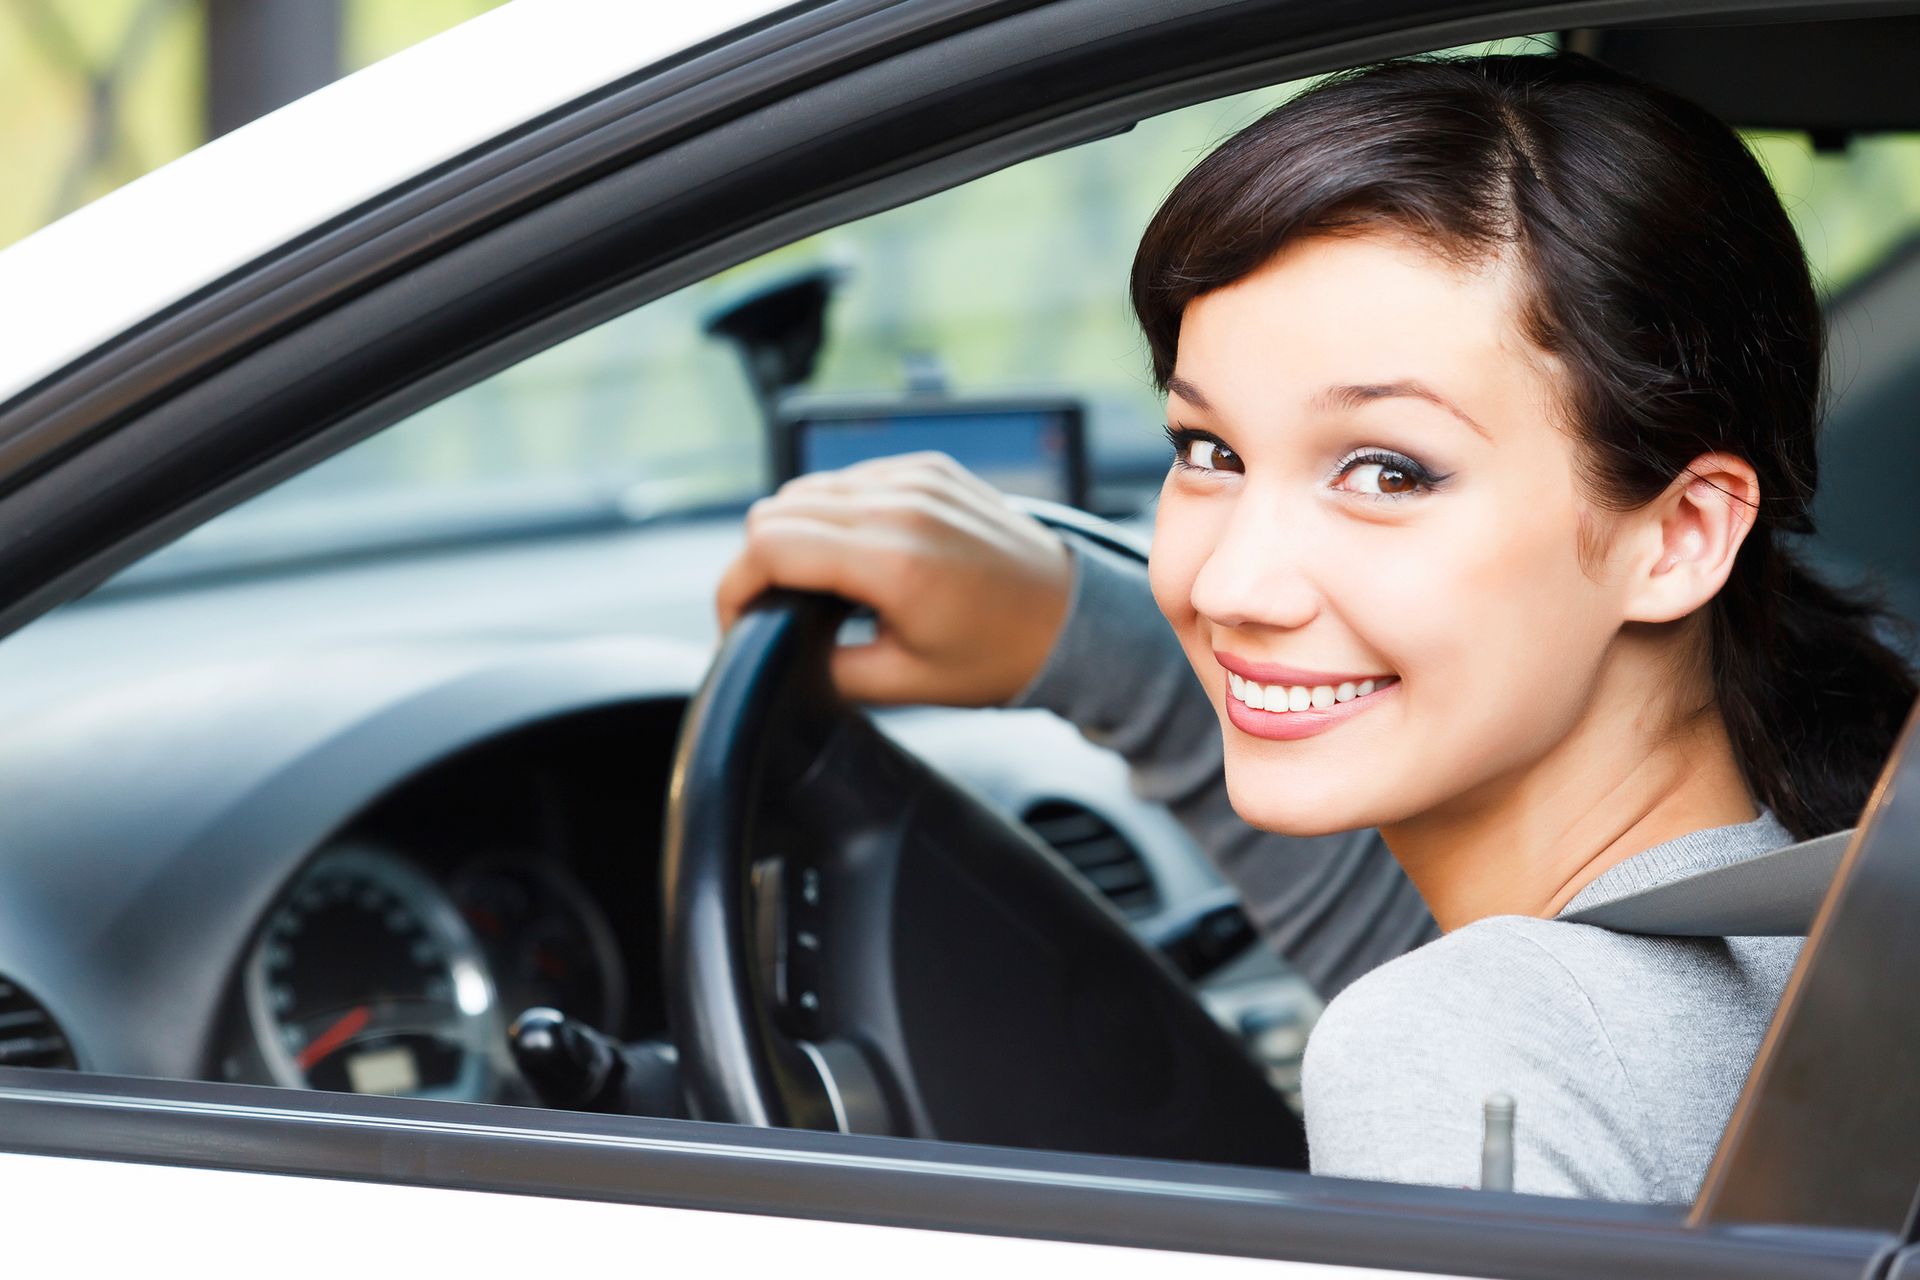 A woman is smiling while sitting in a car